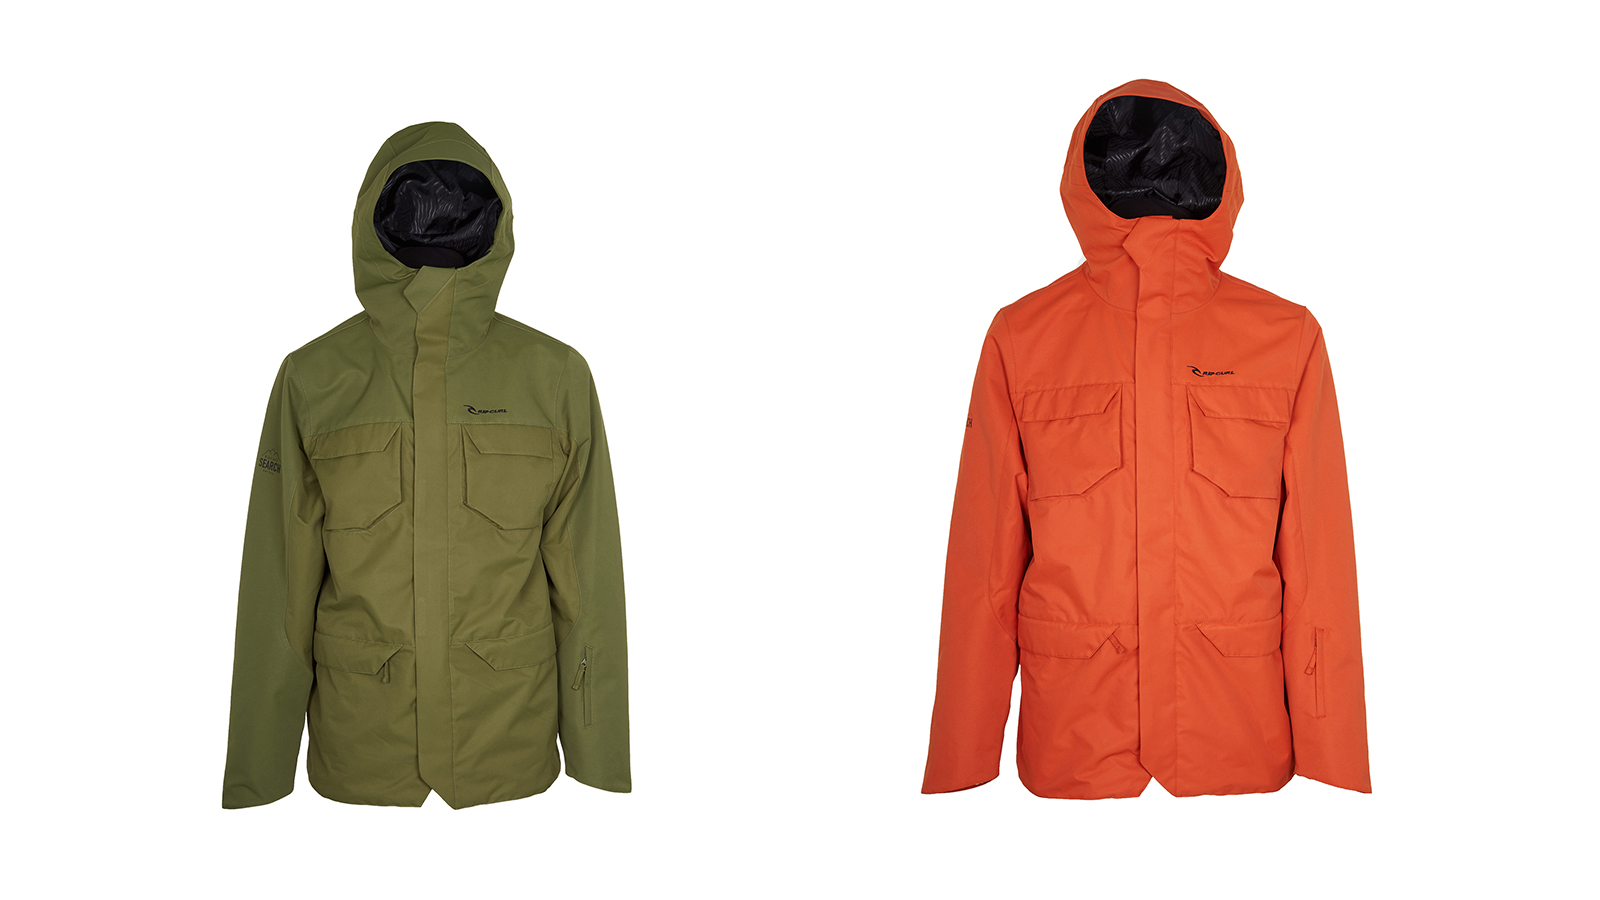 Rip Curl Launches Search Series Mountainwear Collection - New Product ...